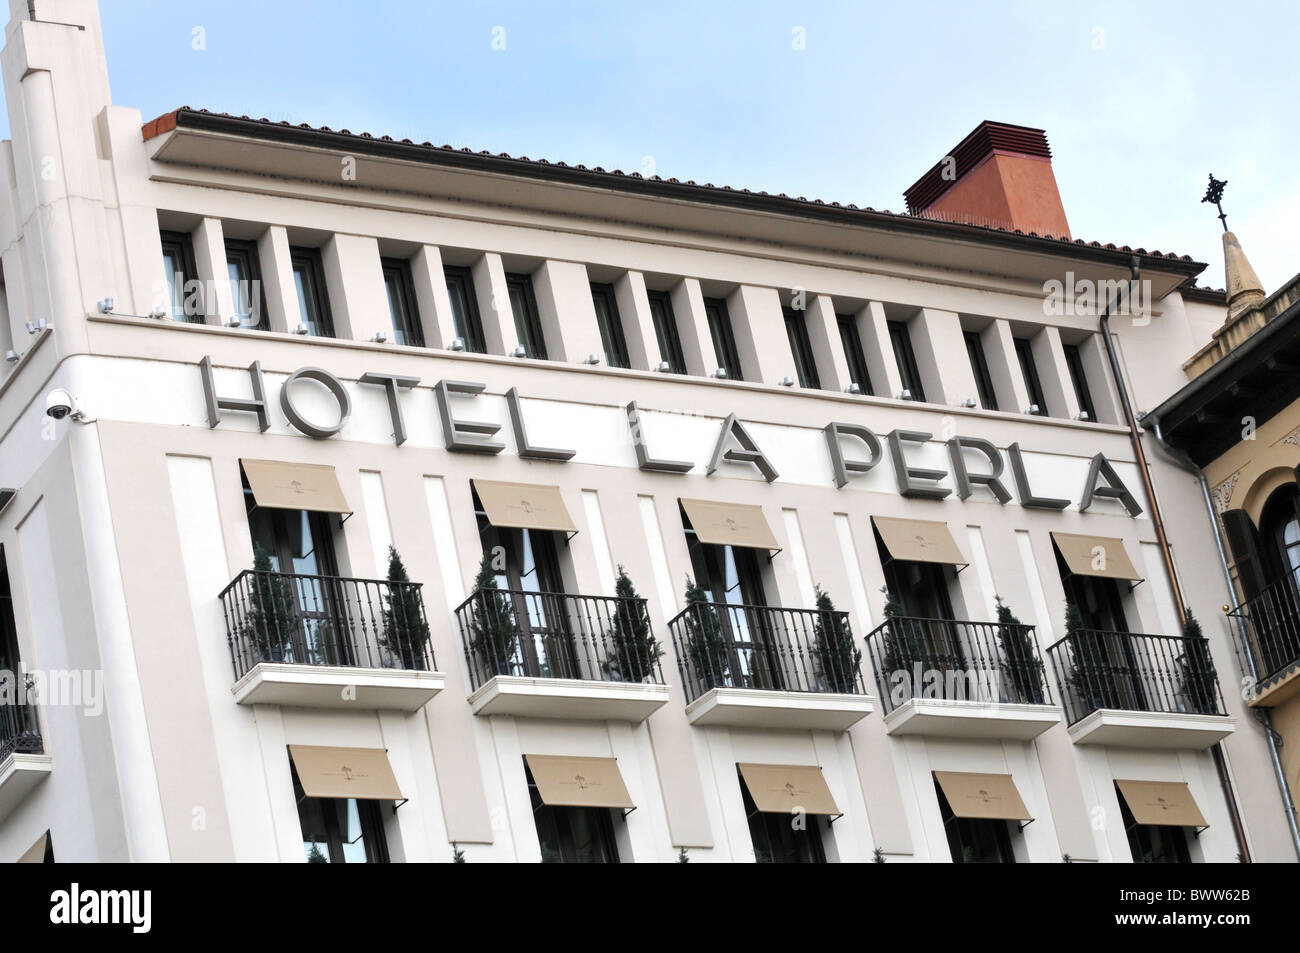 Gran Hotel La Perla High Resolution Stock Photography and Images - Alamy